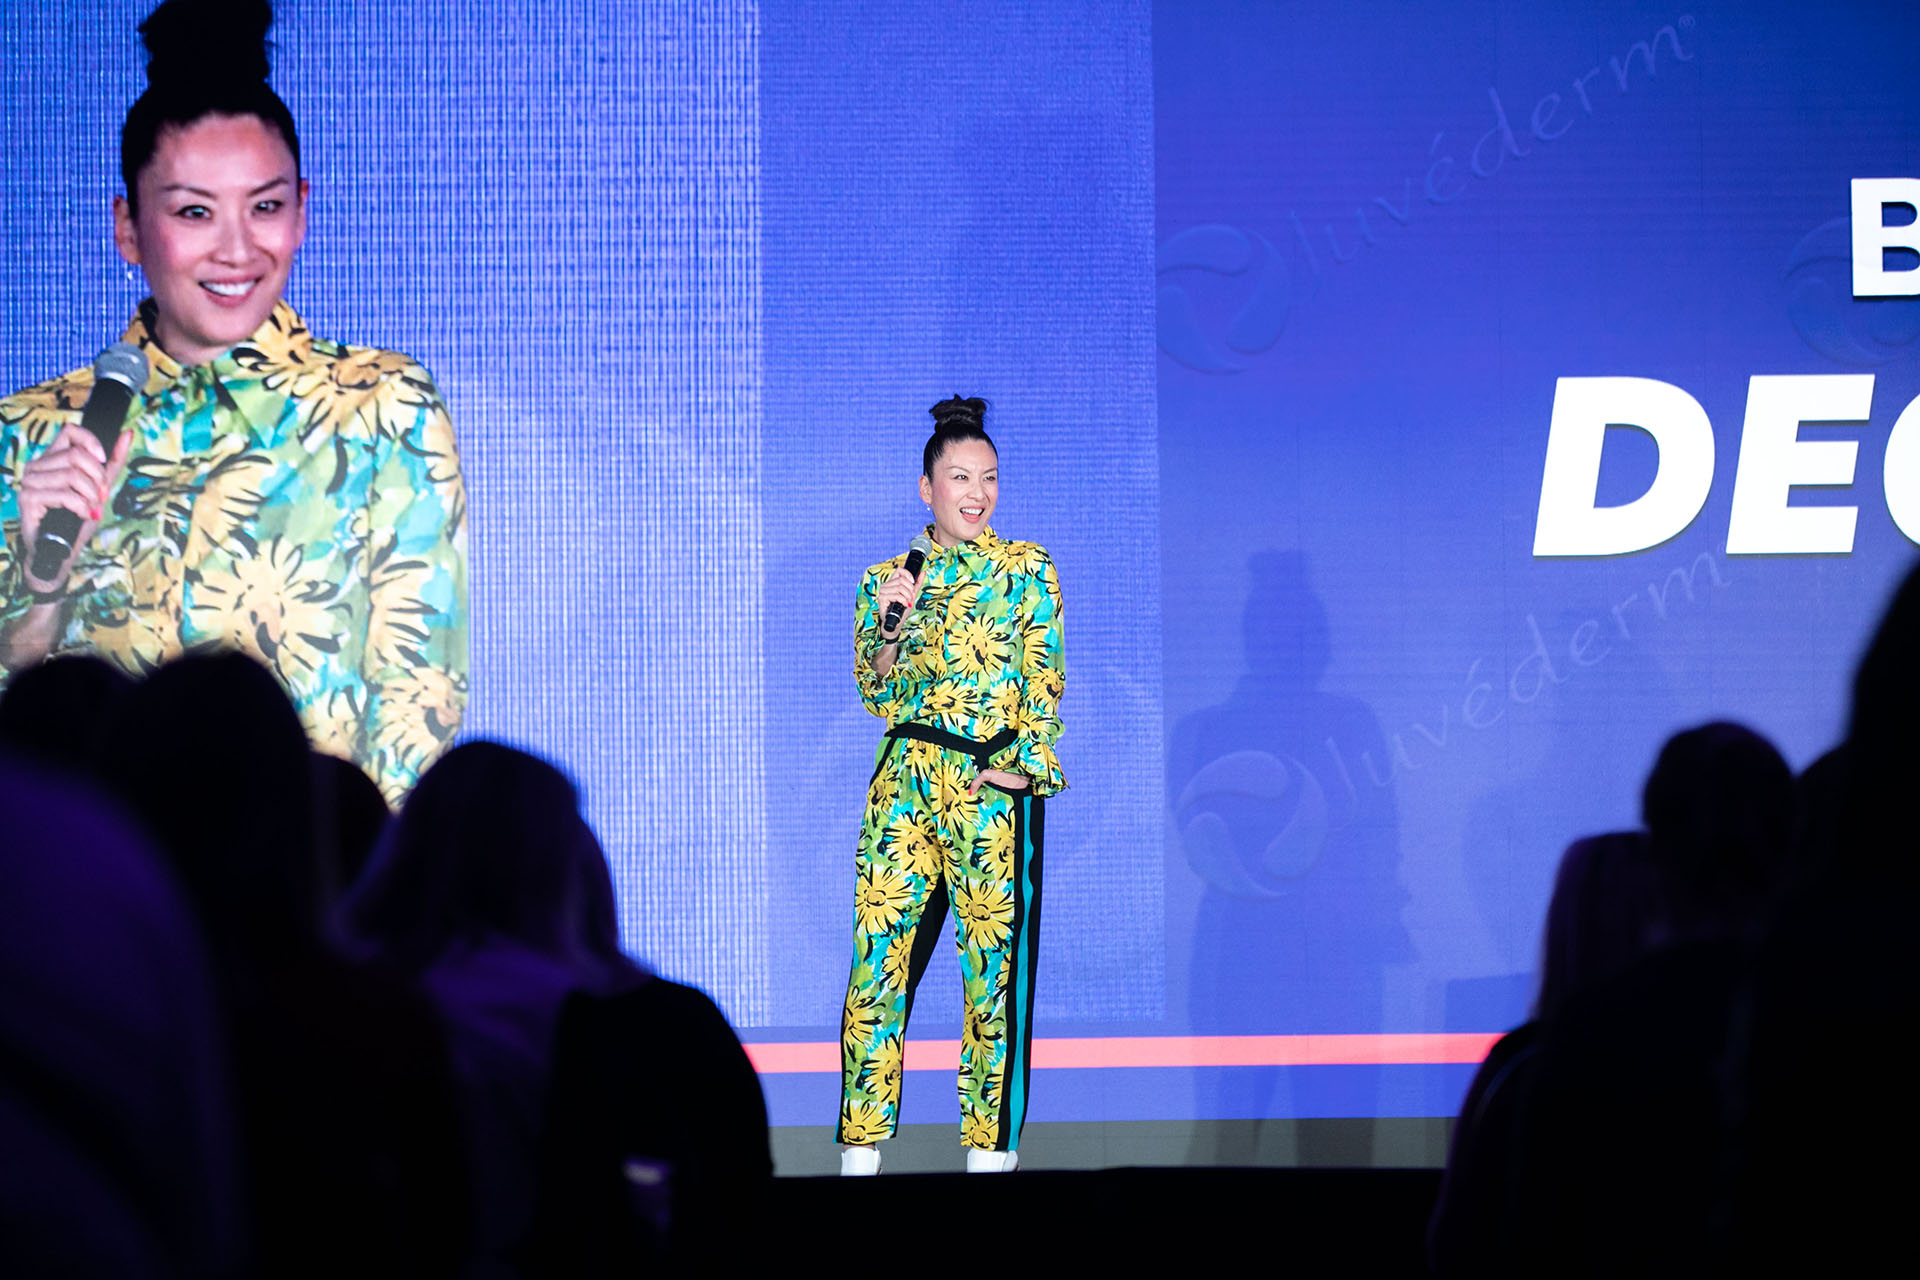 A woman standing on a stage in front of a large screen wearing a floral print suit